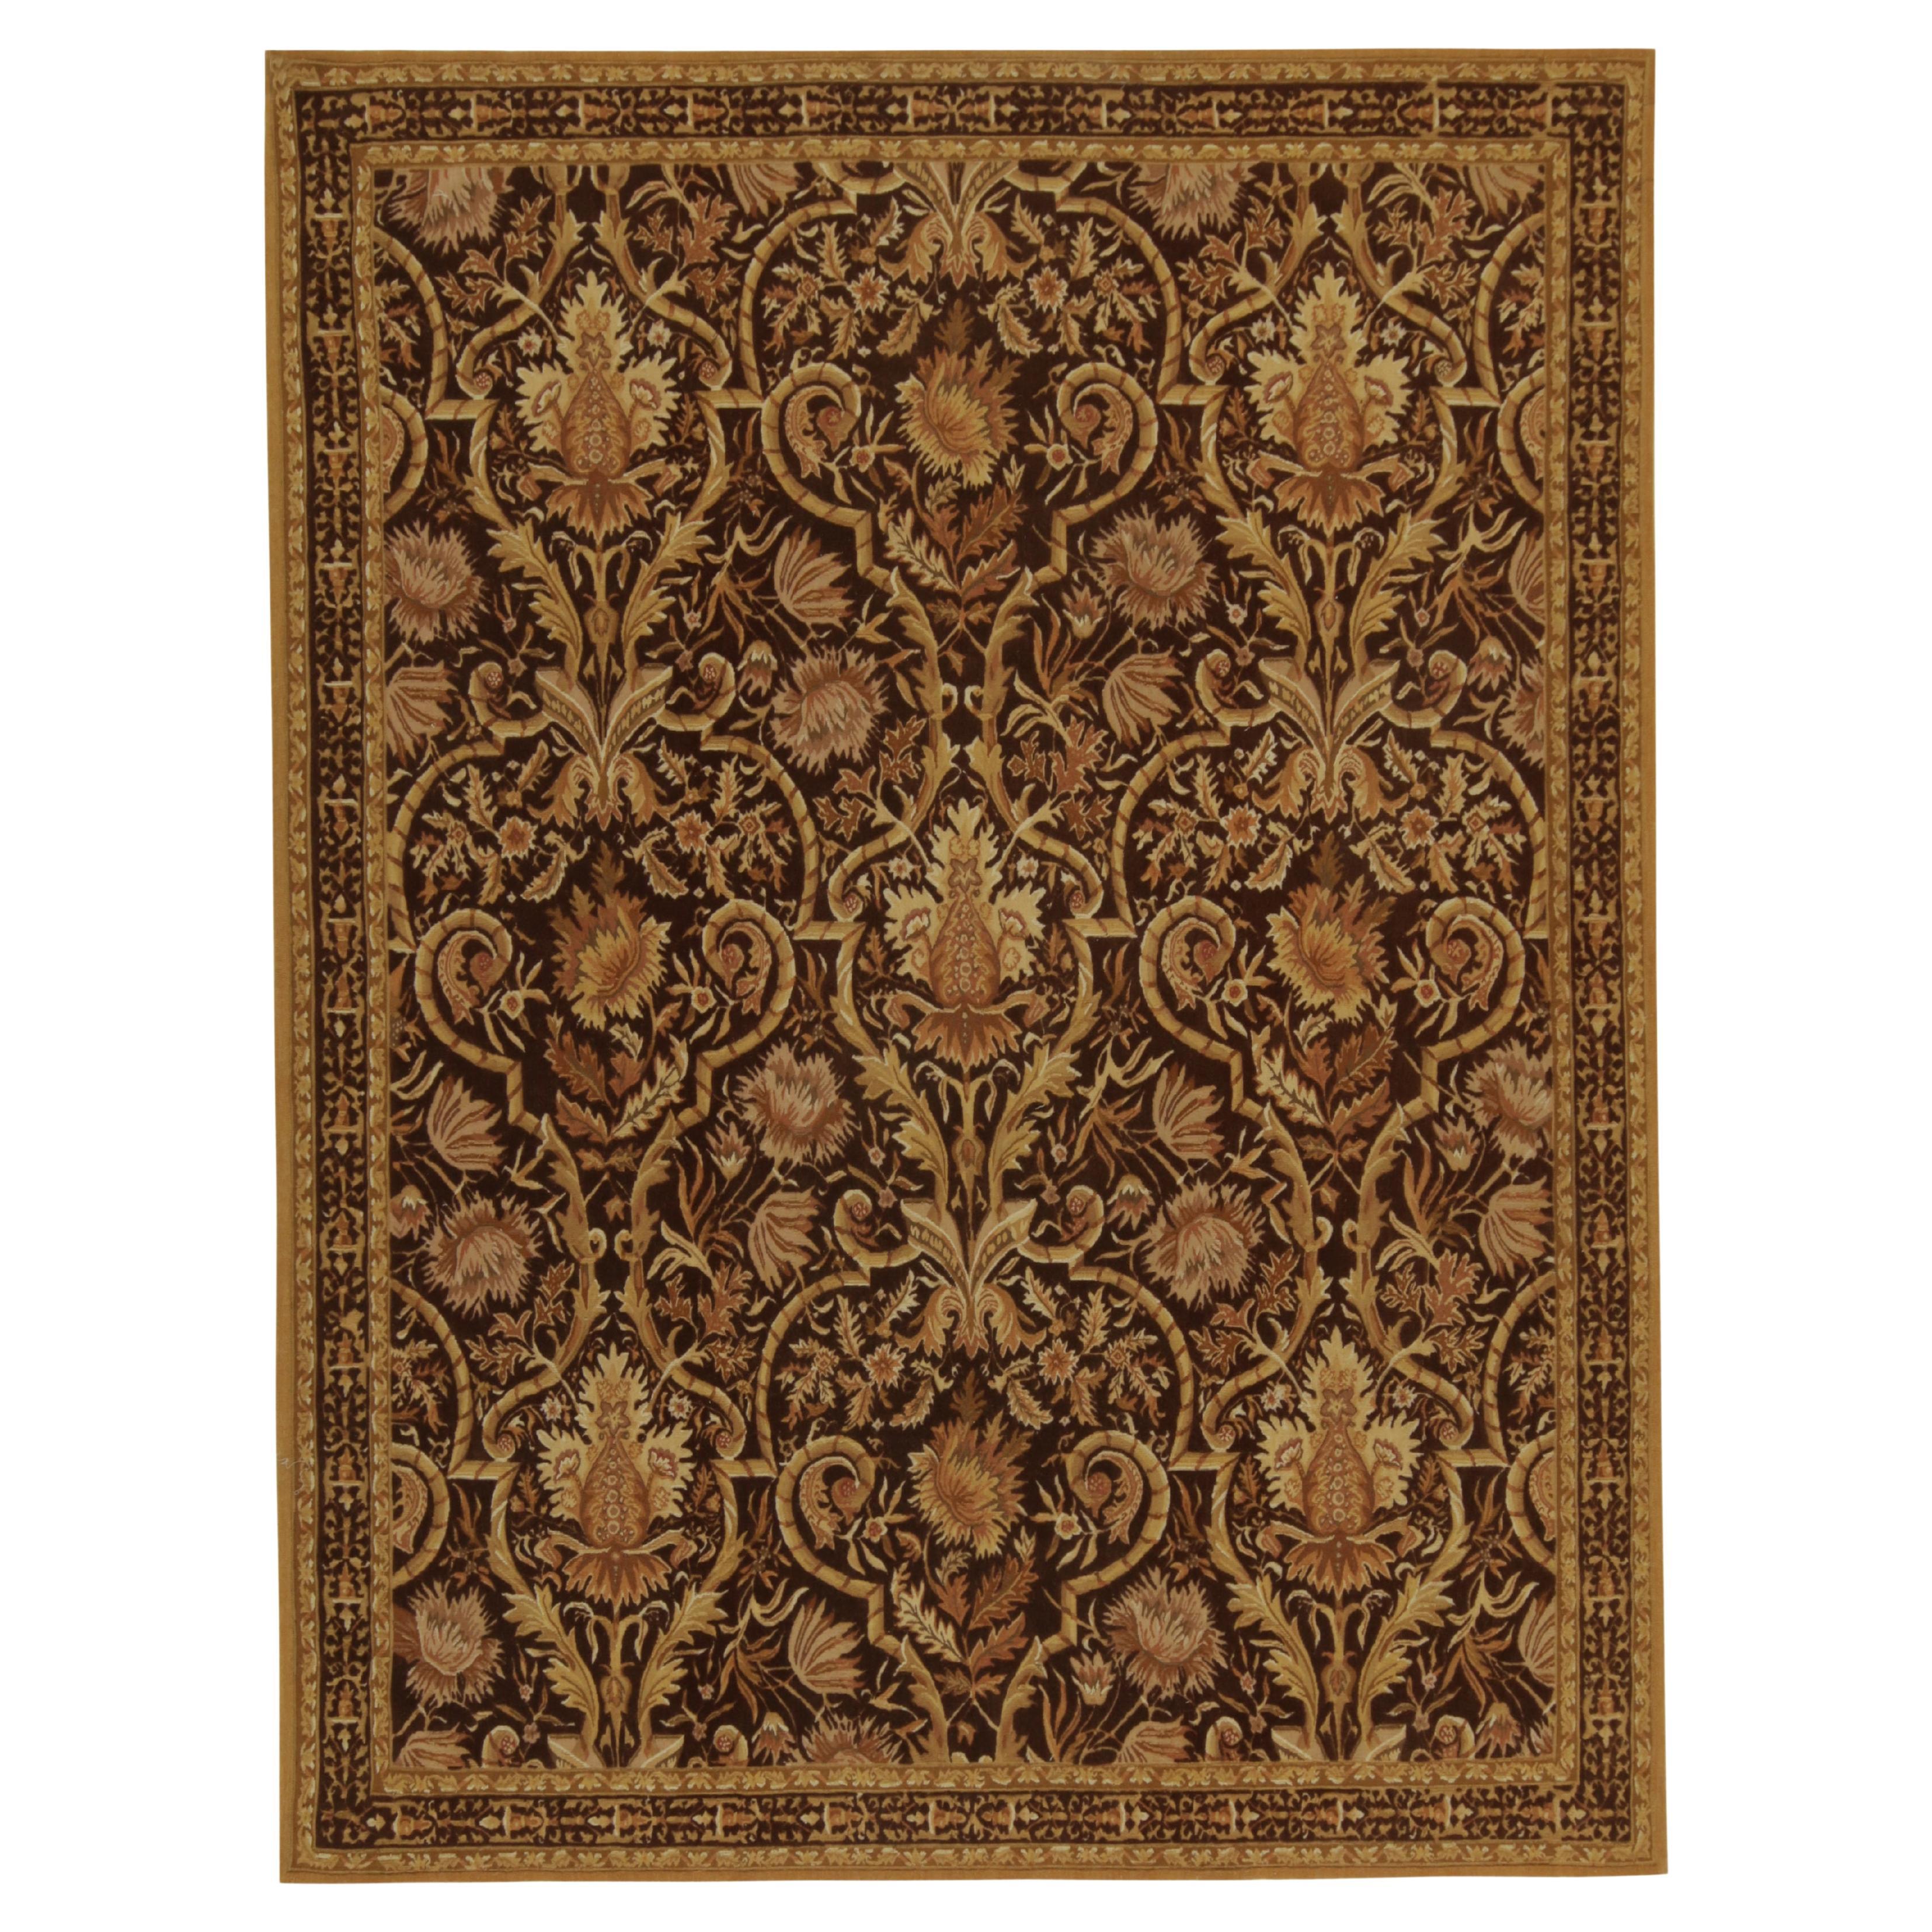 Rug & Kilim’s European Tudor style Kilim in Brown with Gold Floral Pattern For Sale